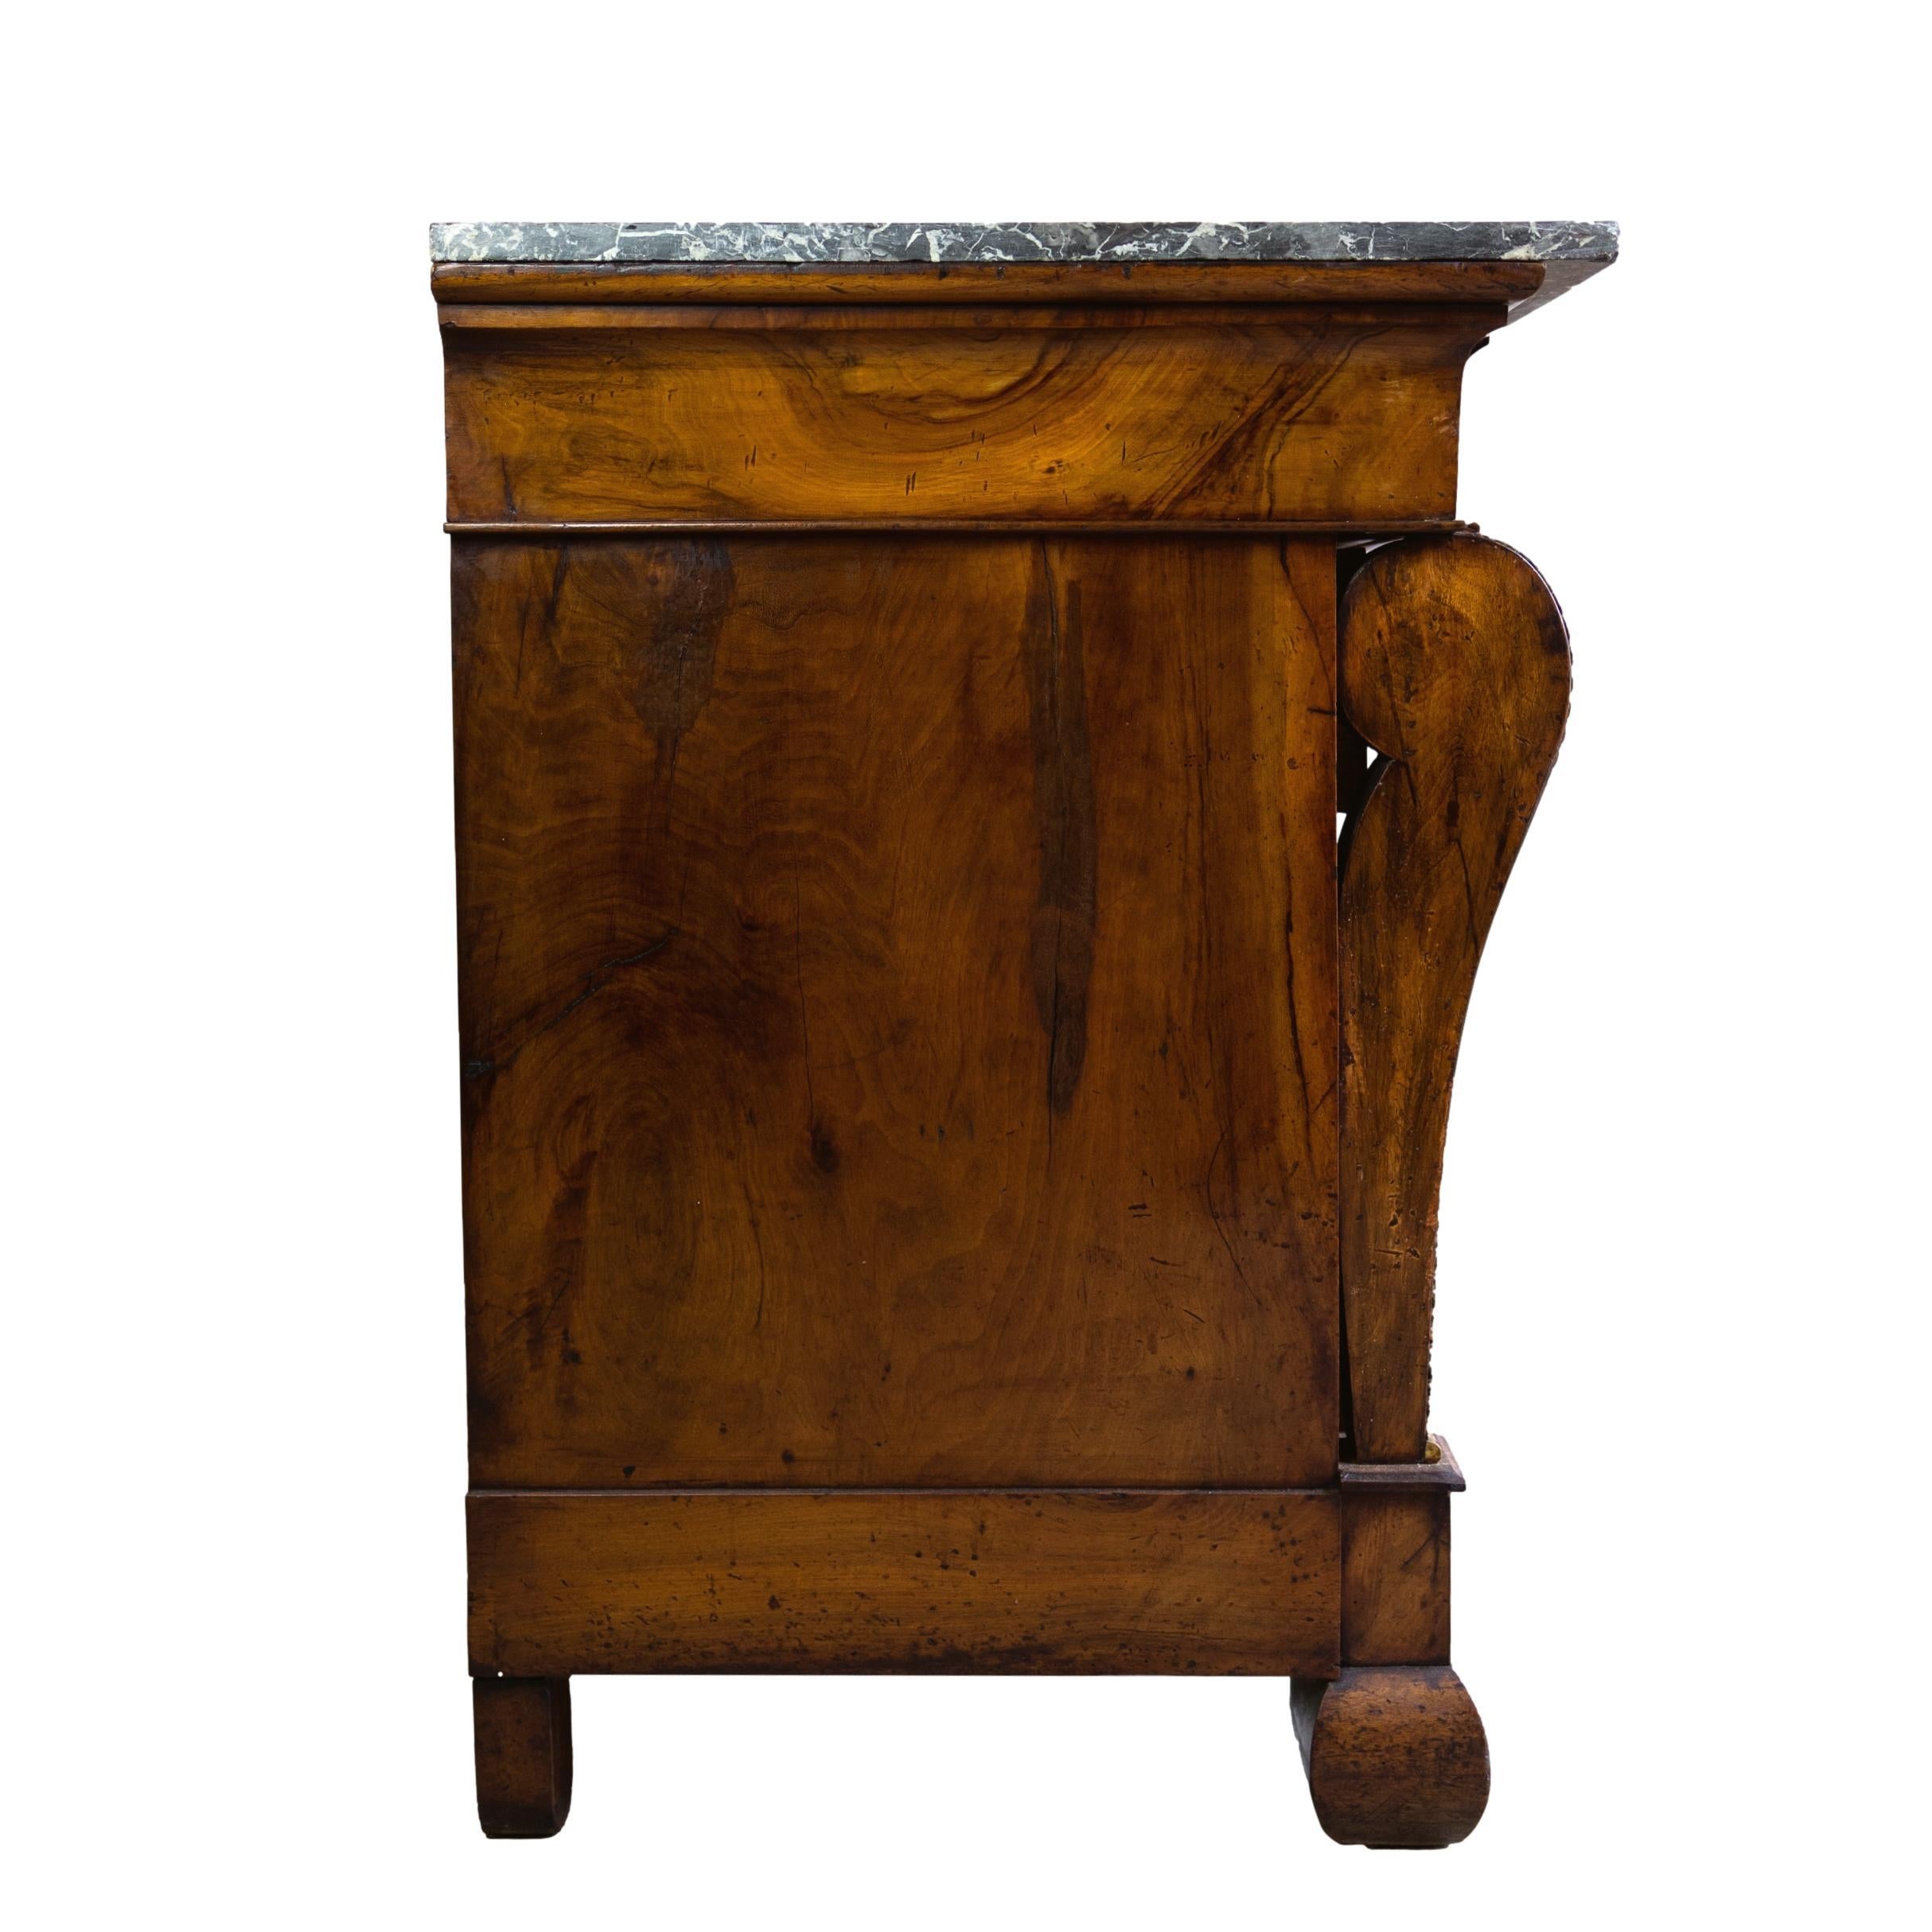 An Empire Commode in figured mahogany with a Belgian black fossilized marble top above a frieze drawer and three uniform drawers flanked by two squared columns, each with ormolu mounts in the form of stylized acanthus leaves to the knees, the pulls